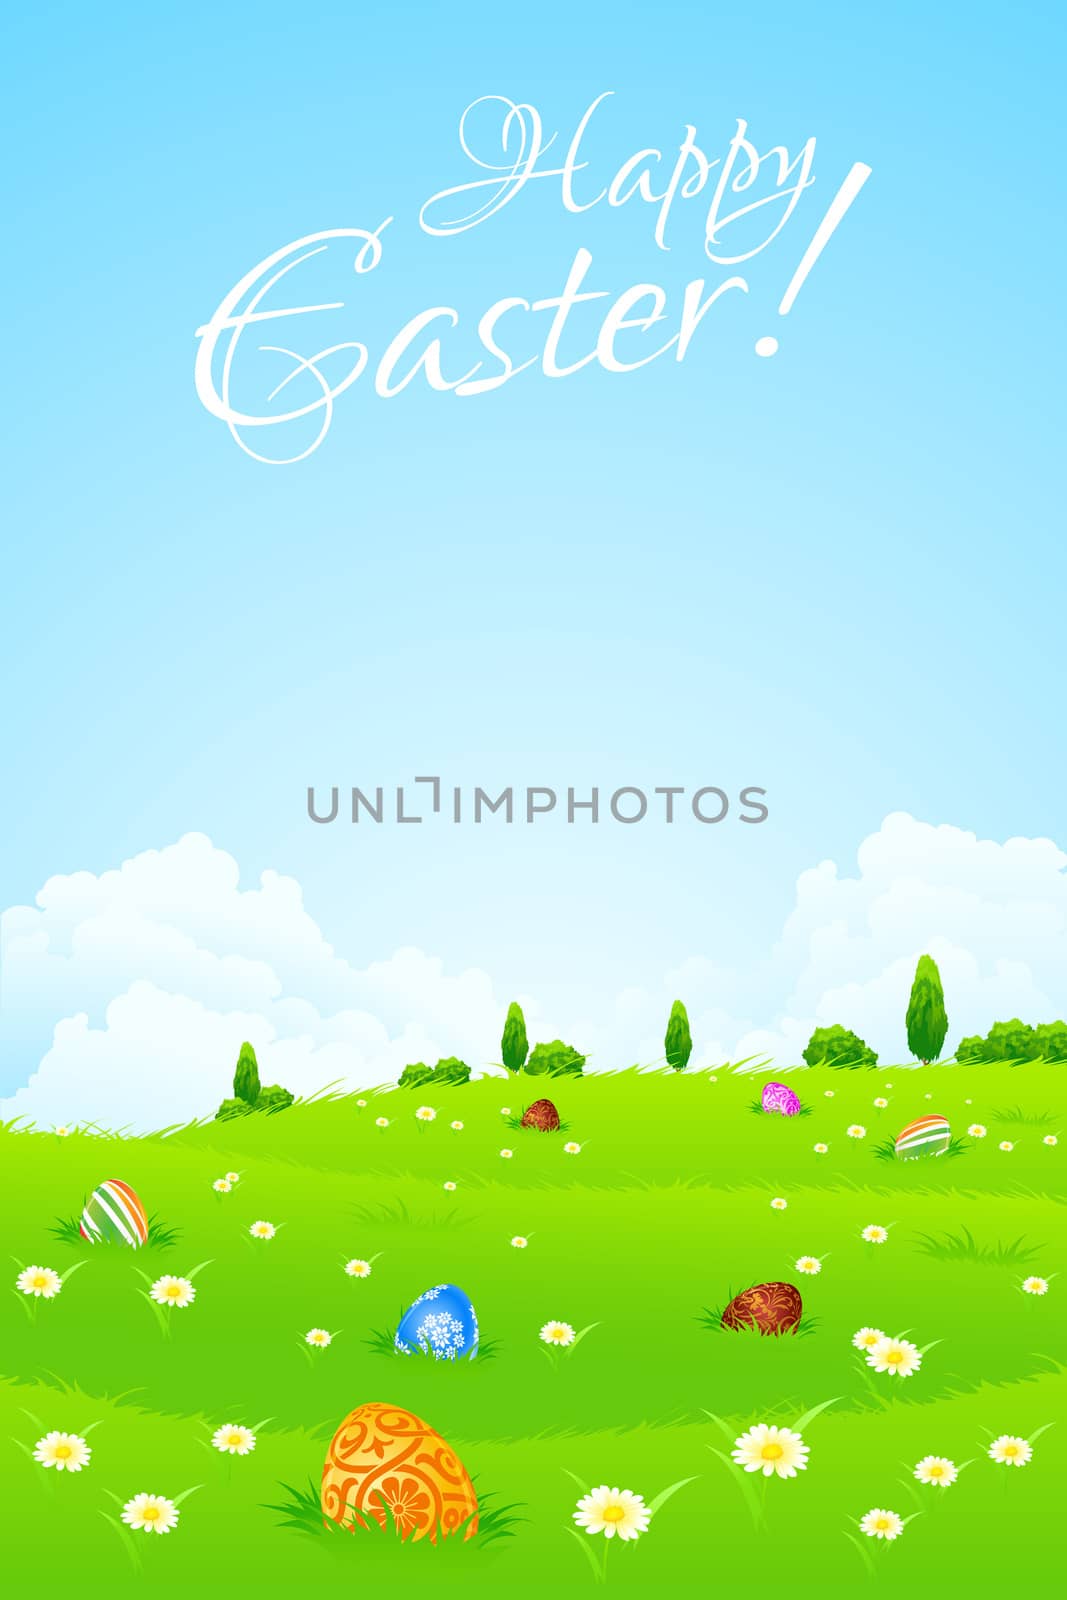 Green Landscape Background with Easter Eggs, Flowers, Trees and Clouds